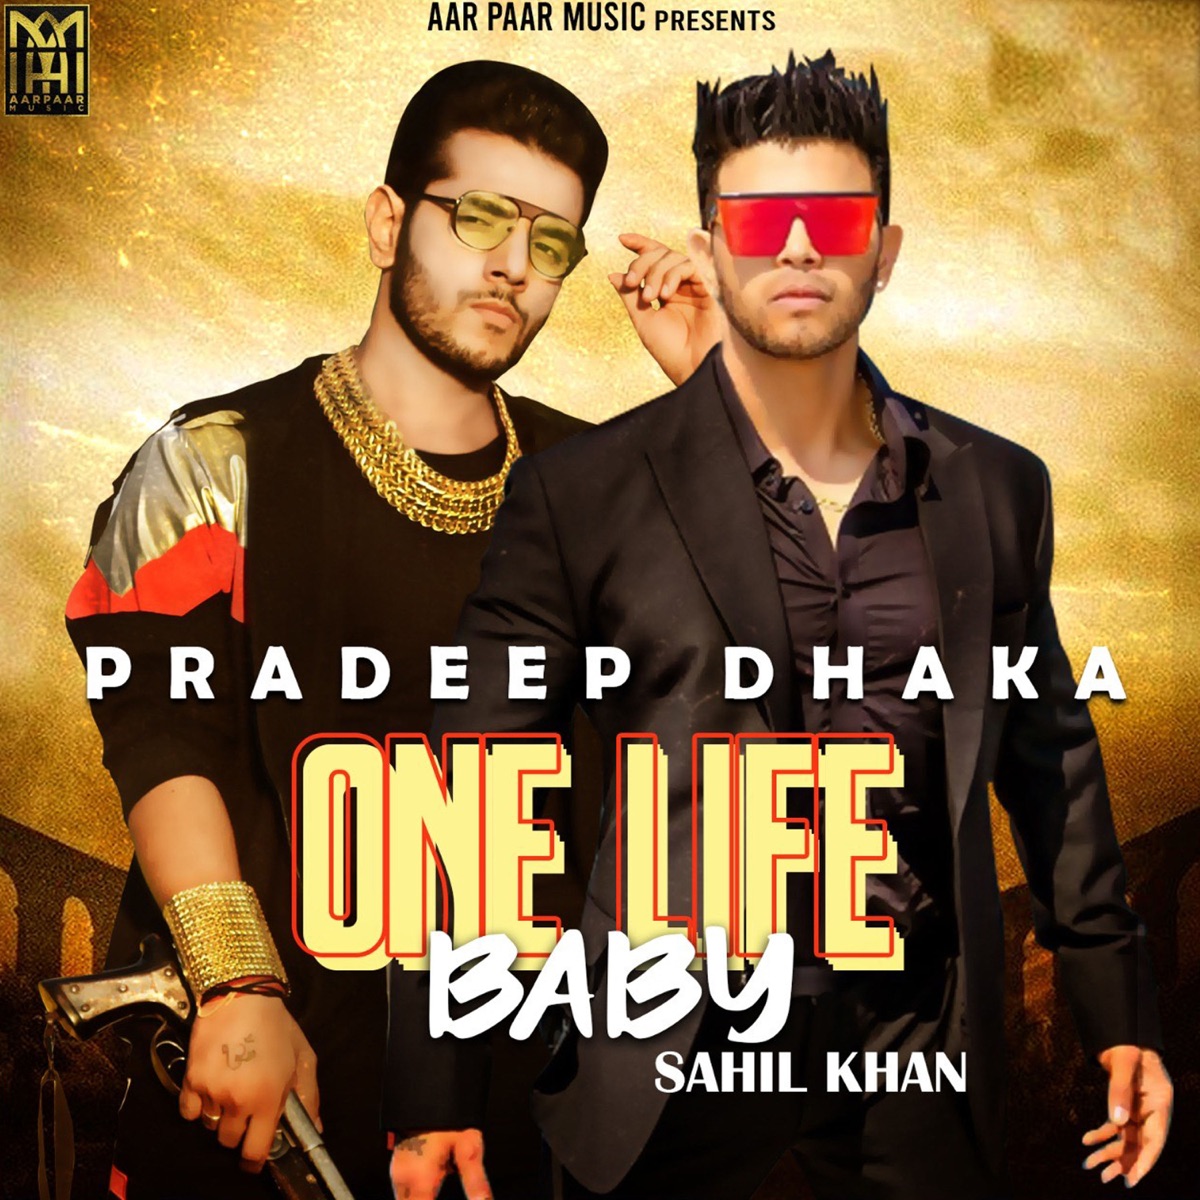 One life baby song download sahil khan